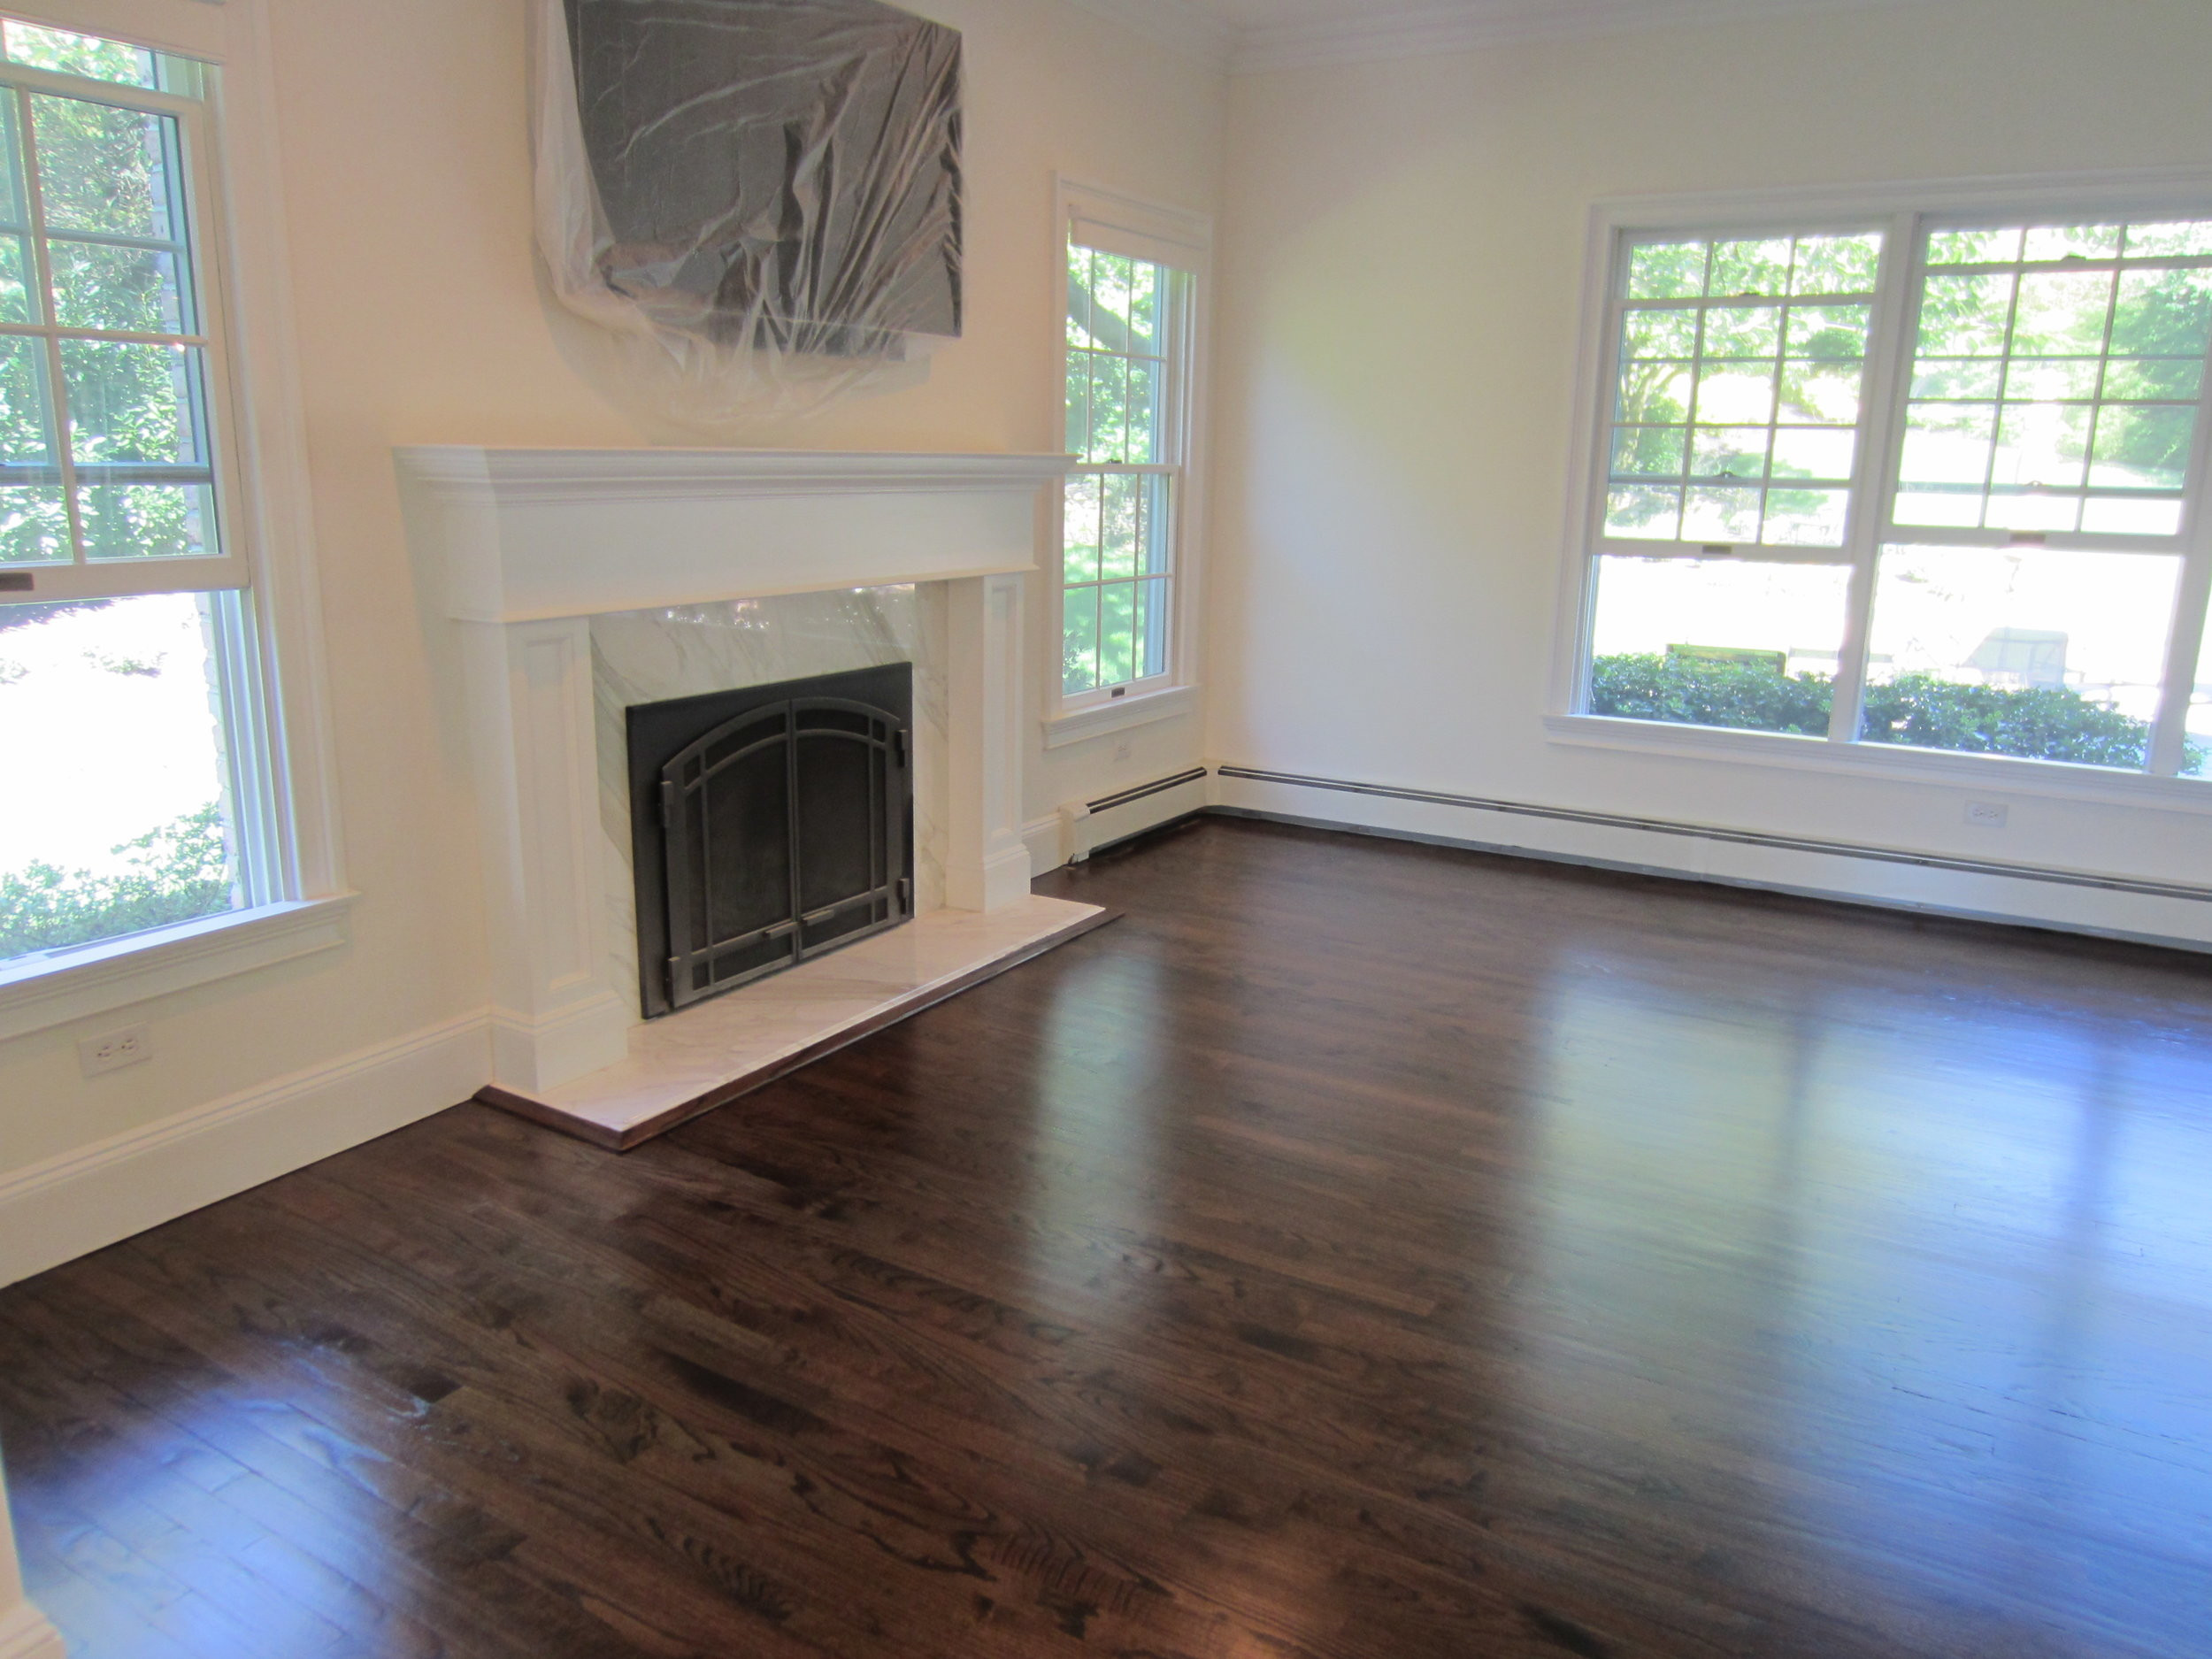 20 Unique Hardwood Floor Refinishing fort Collins Co 2024 free download hardwood floor refinishing fort collins co of dark walnut stain on red oak floors pictures wikizie co within red oak vs white hardwood flooring which is better valenti